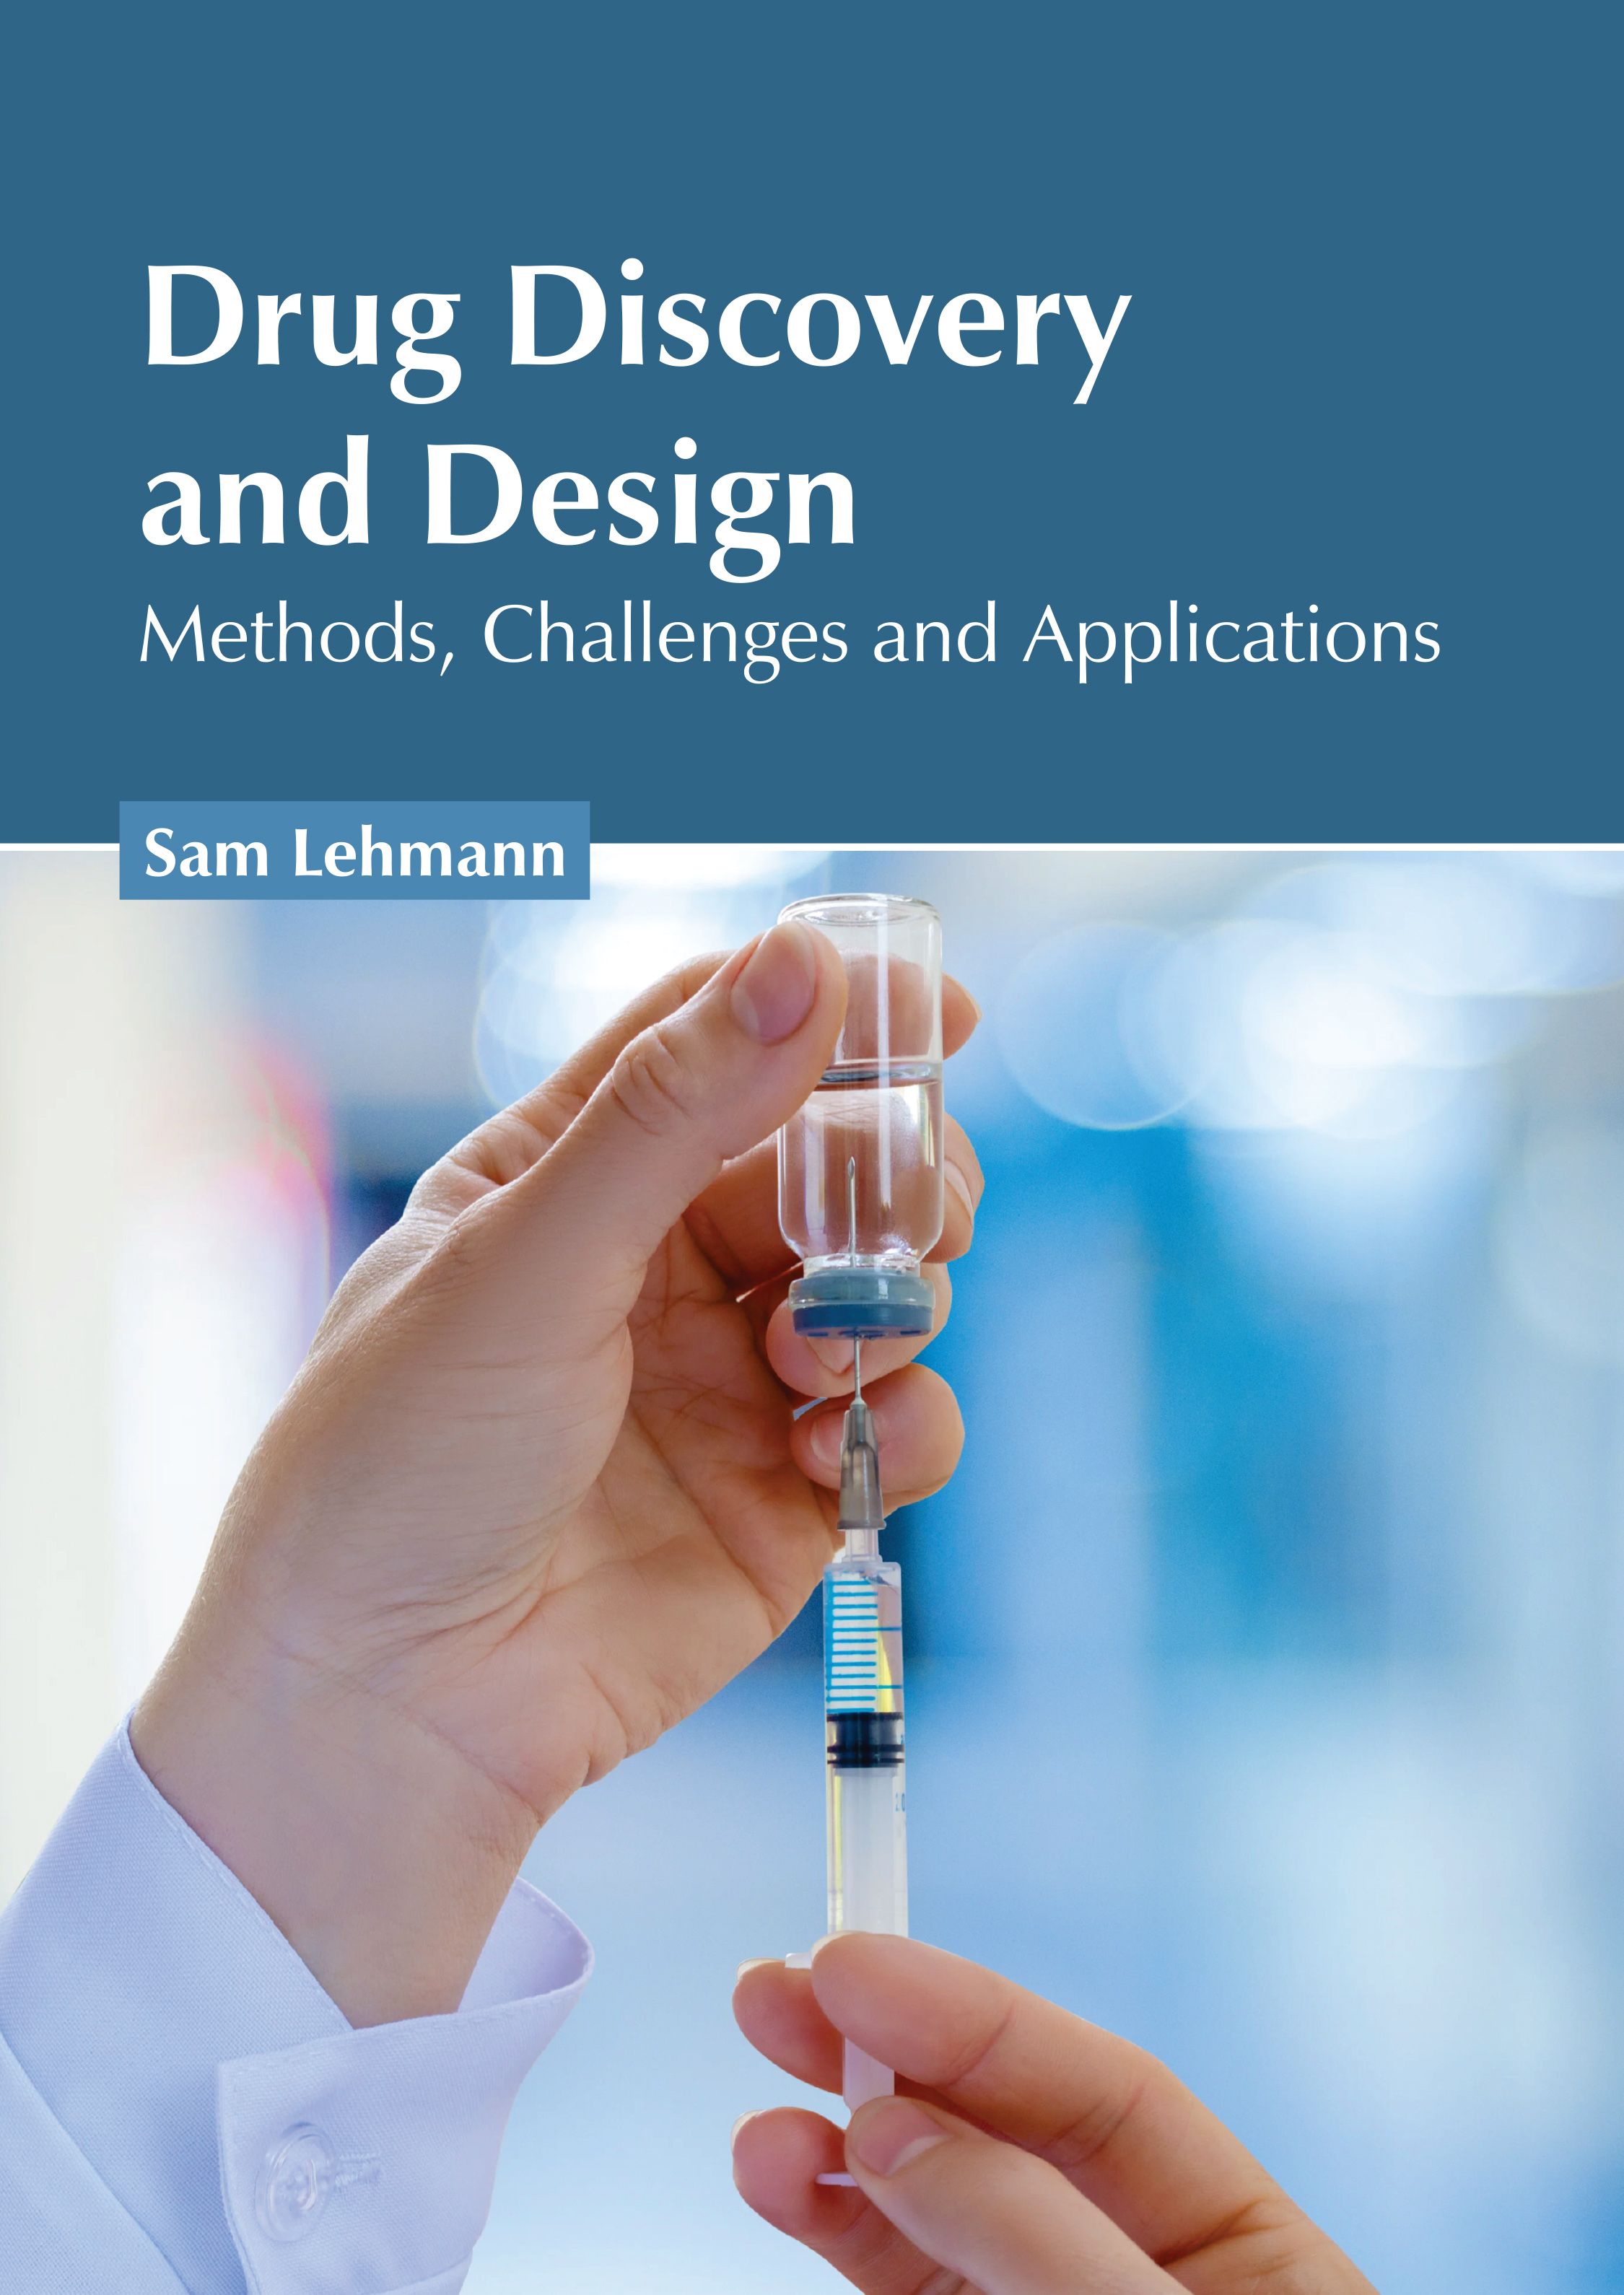 DRUG DISCOVERY AND DESIGN: METHODS, CHALLENGES AND APPLICATIONS